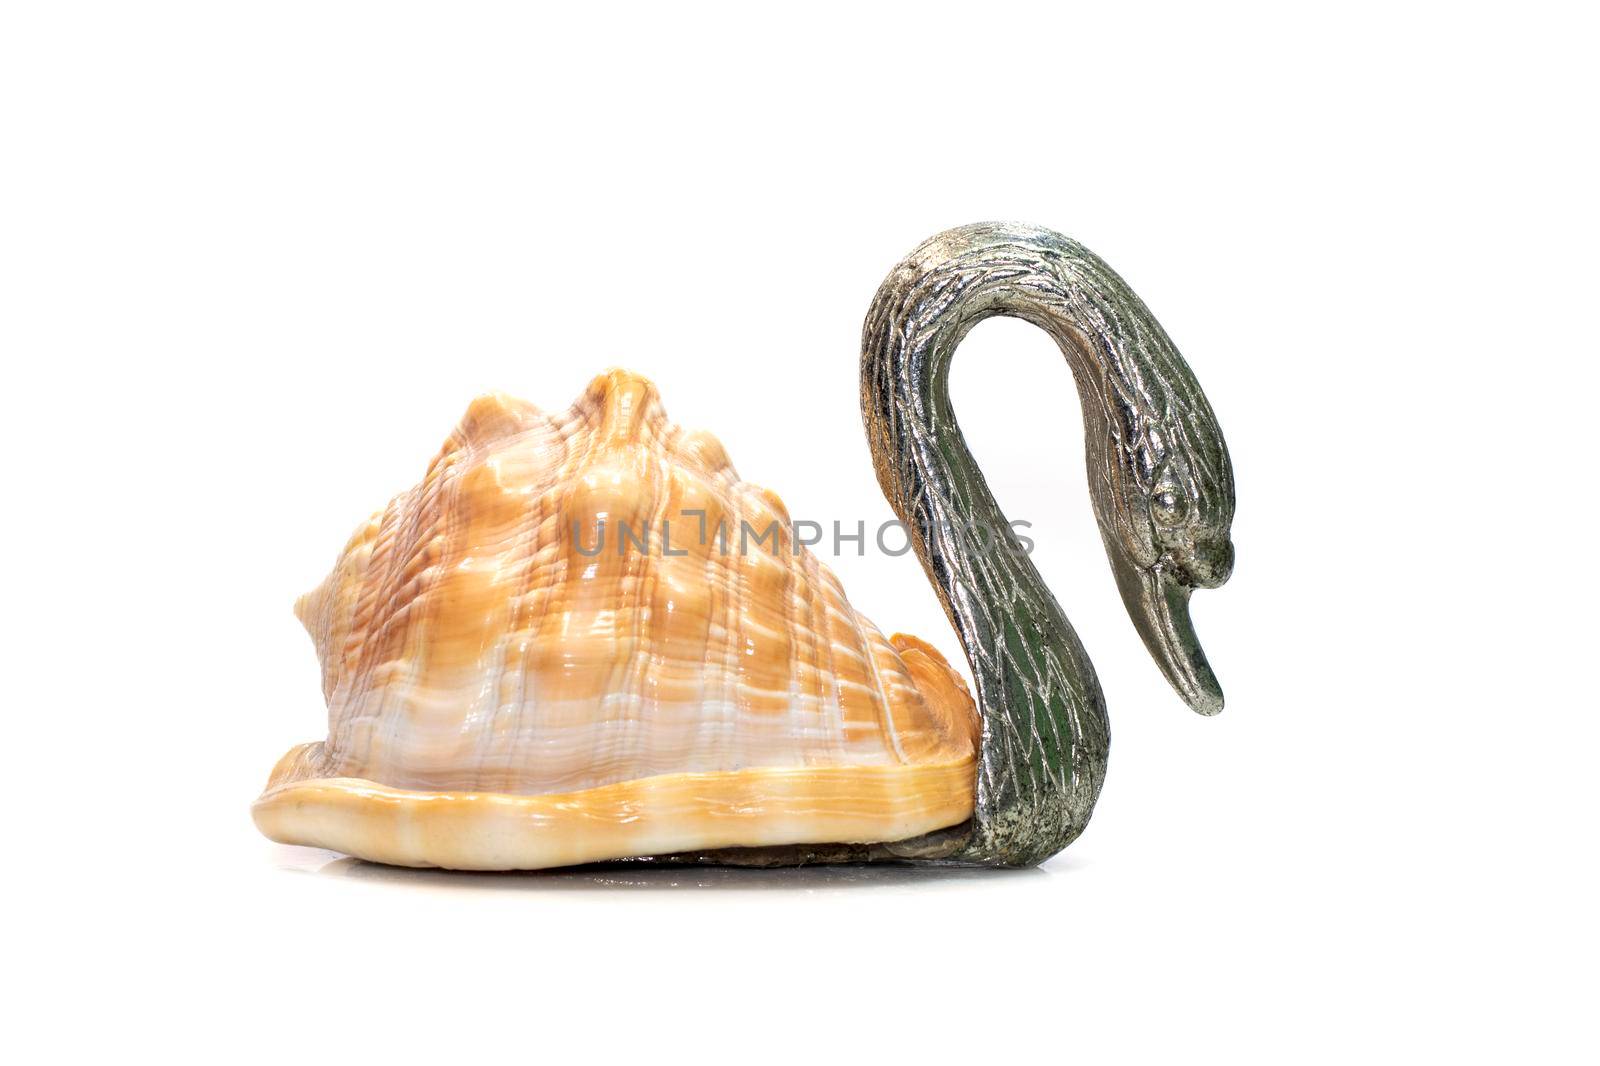 Image of swan sculpture with shells as part of its body. isolated on white background. Home decoration